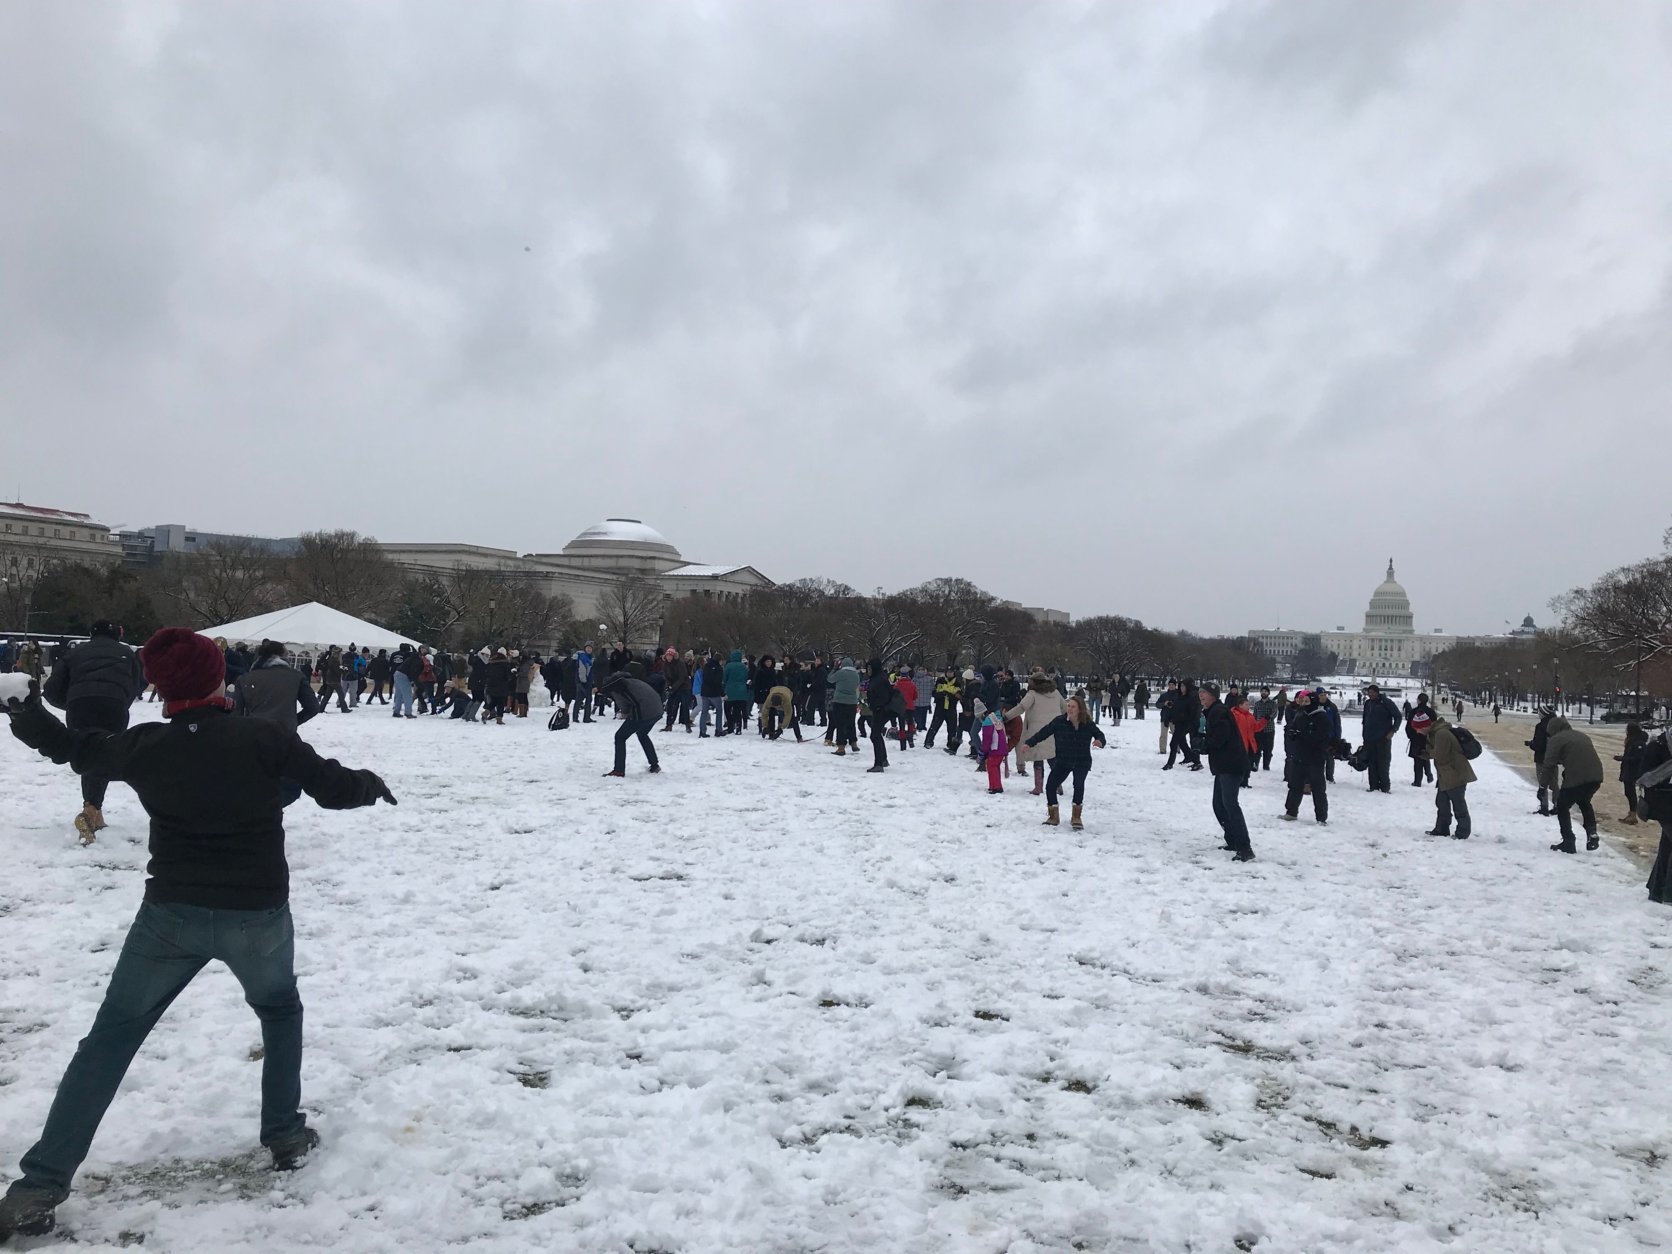 A snowball fight takes place at the National Mall during a spring snow storm on Wednesday, March 21, 2018. (WTOP/Dick Uliano)